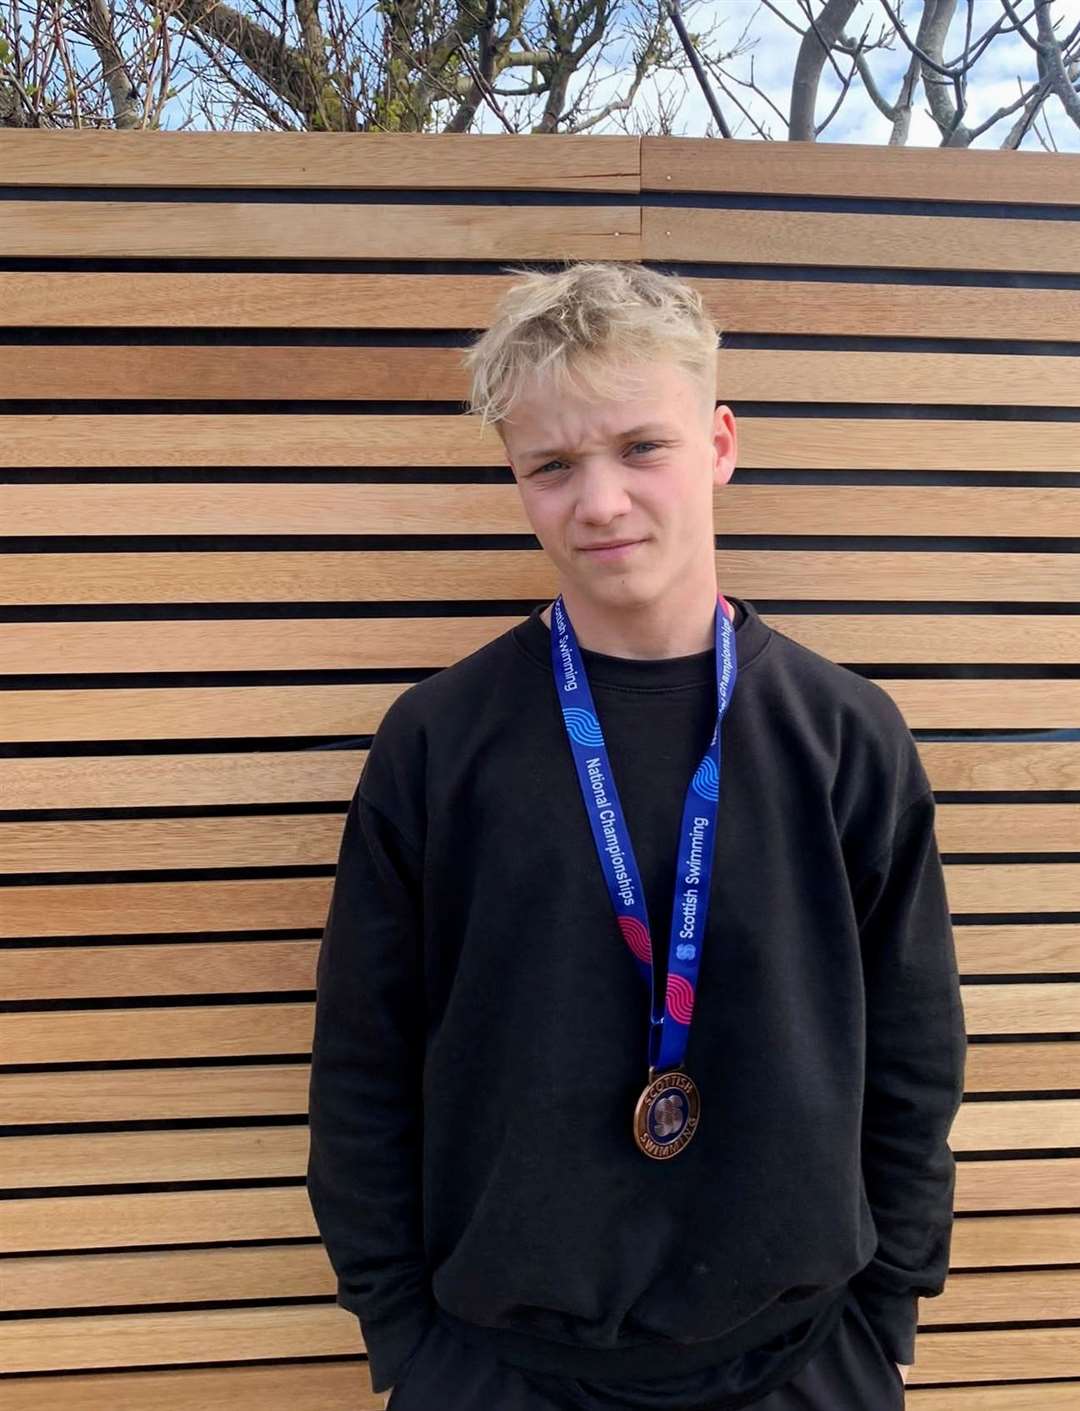 Edward Mills was a medallist in the Scottish National Age Group Swimming Championships.